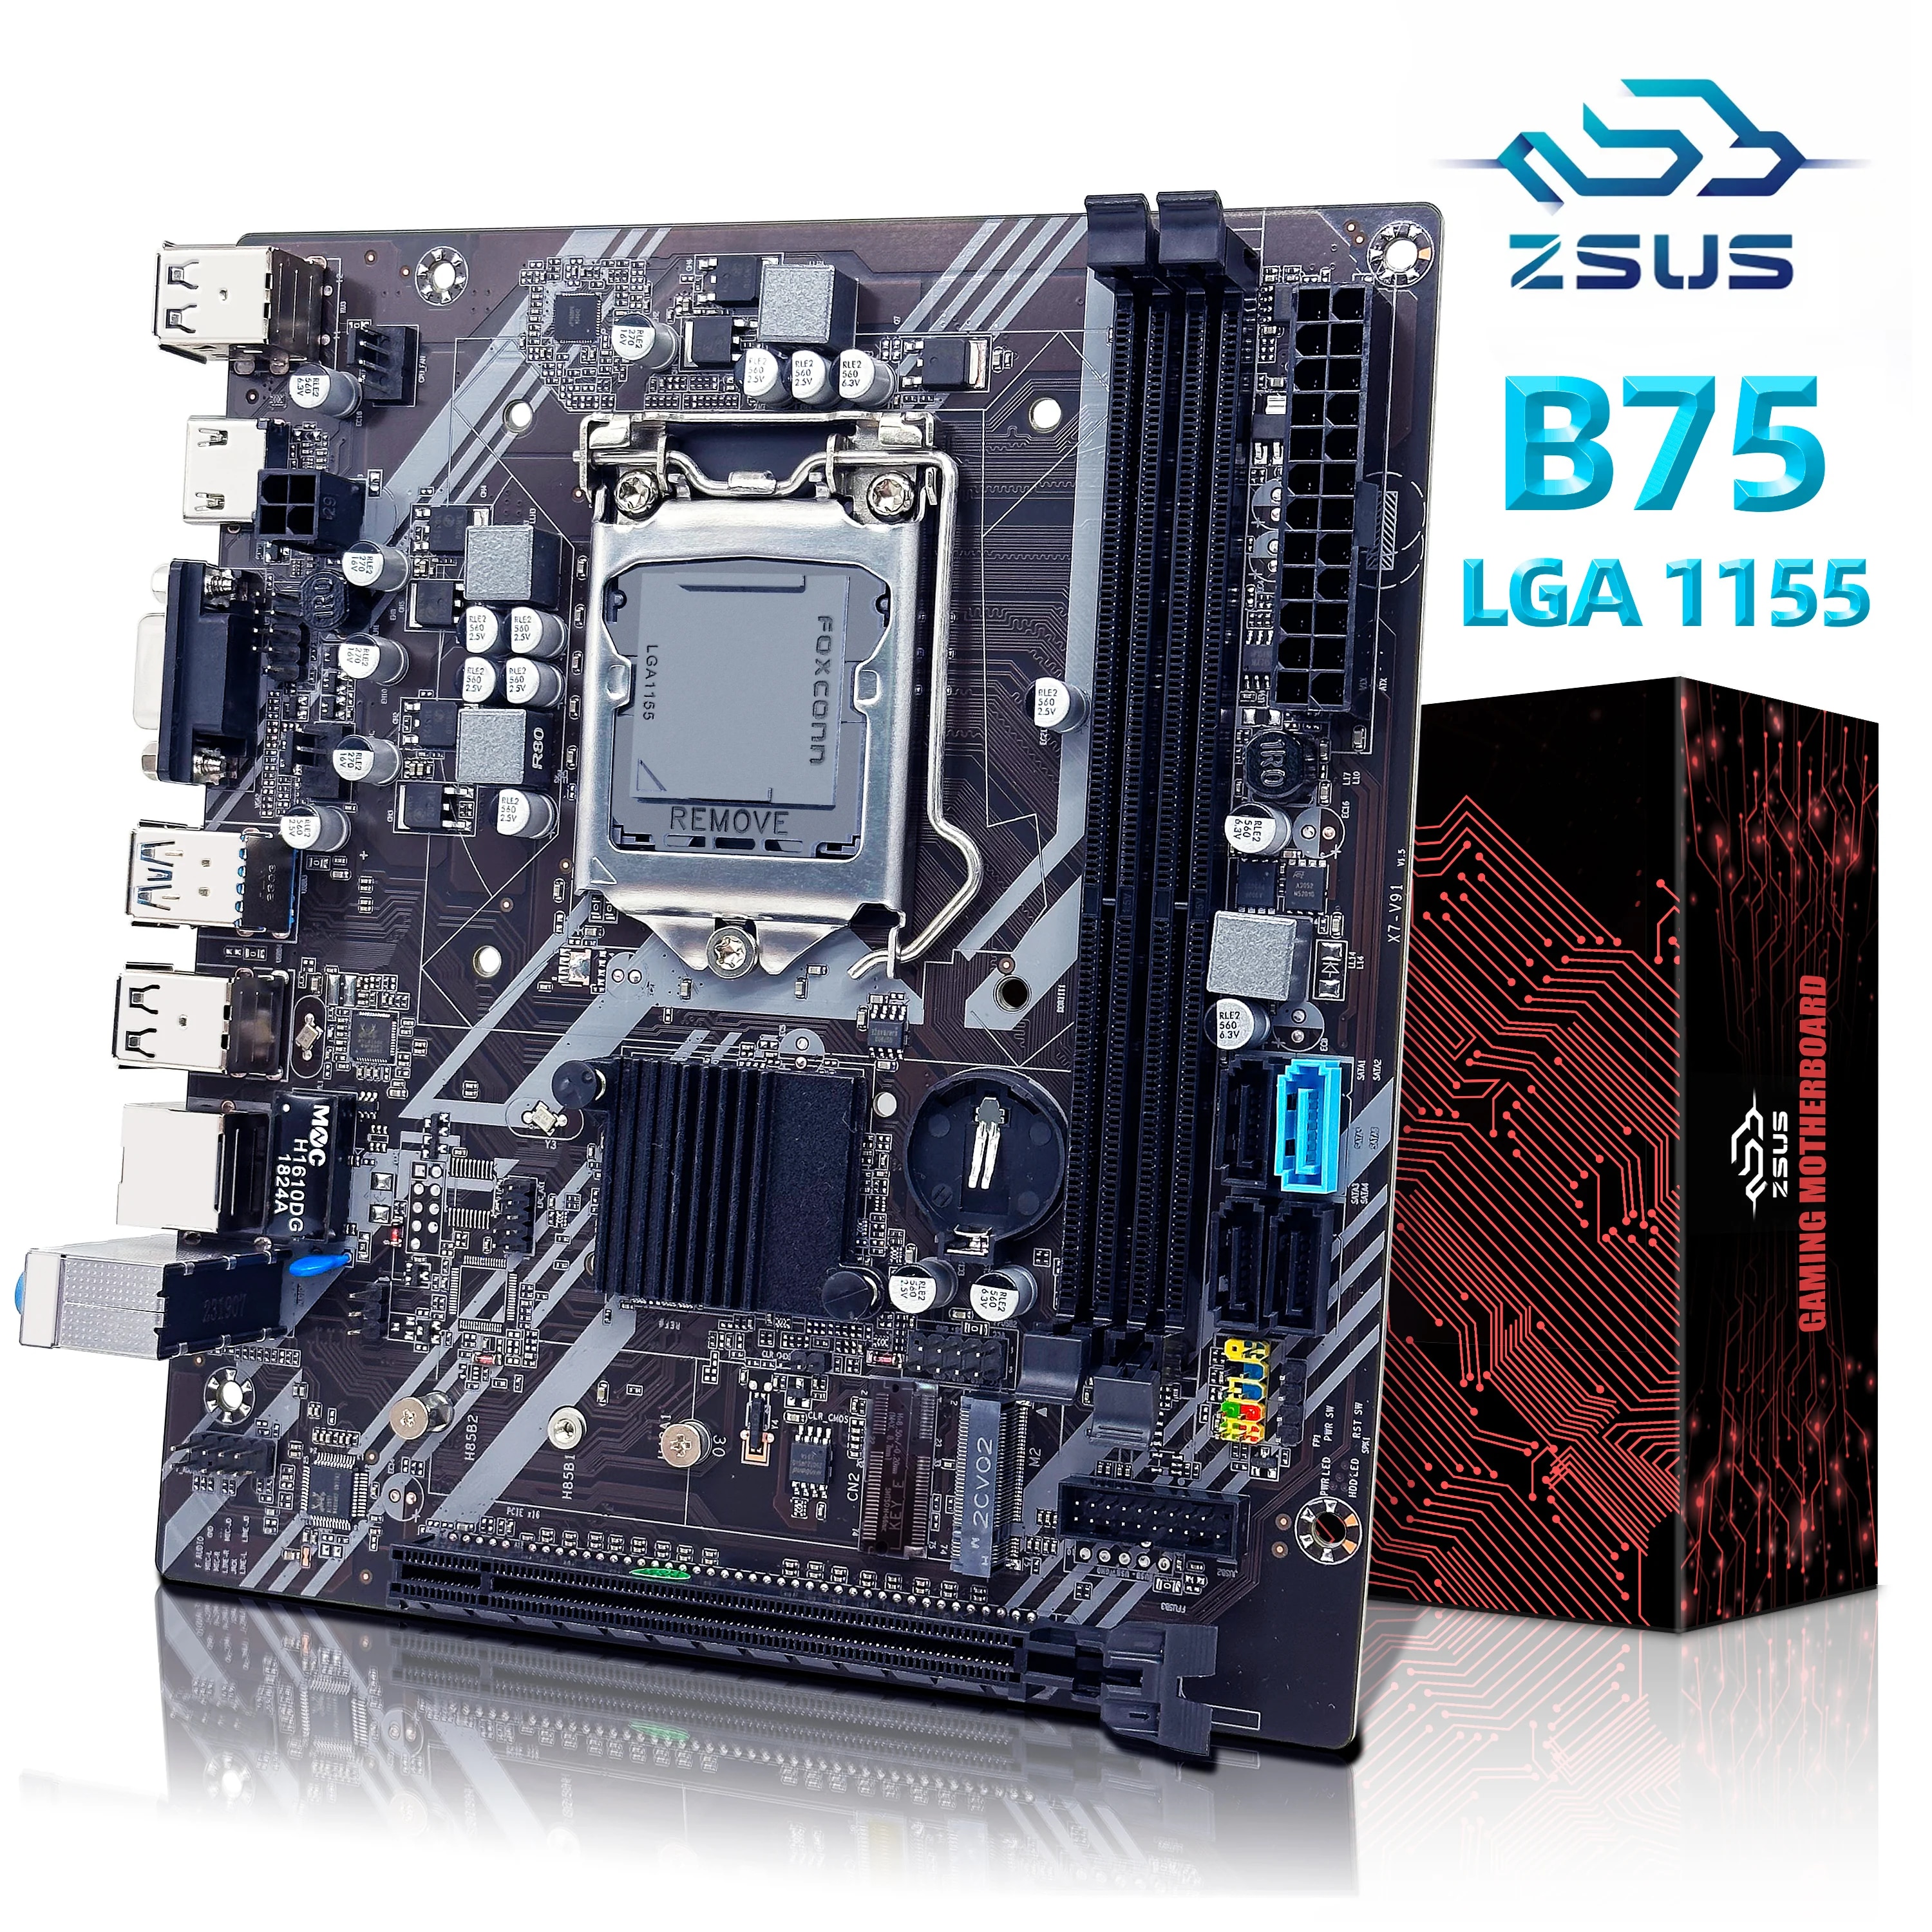 ZSUS B75 Motherboard LGA 1155 DDR3 with NVME M.2 Interface